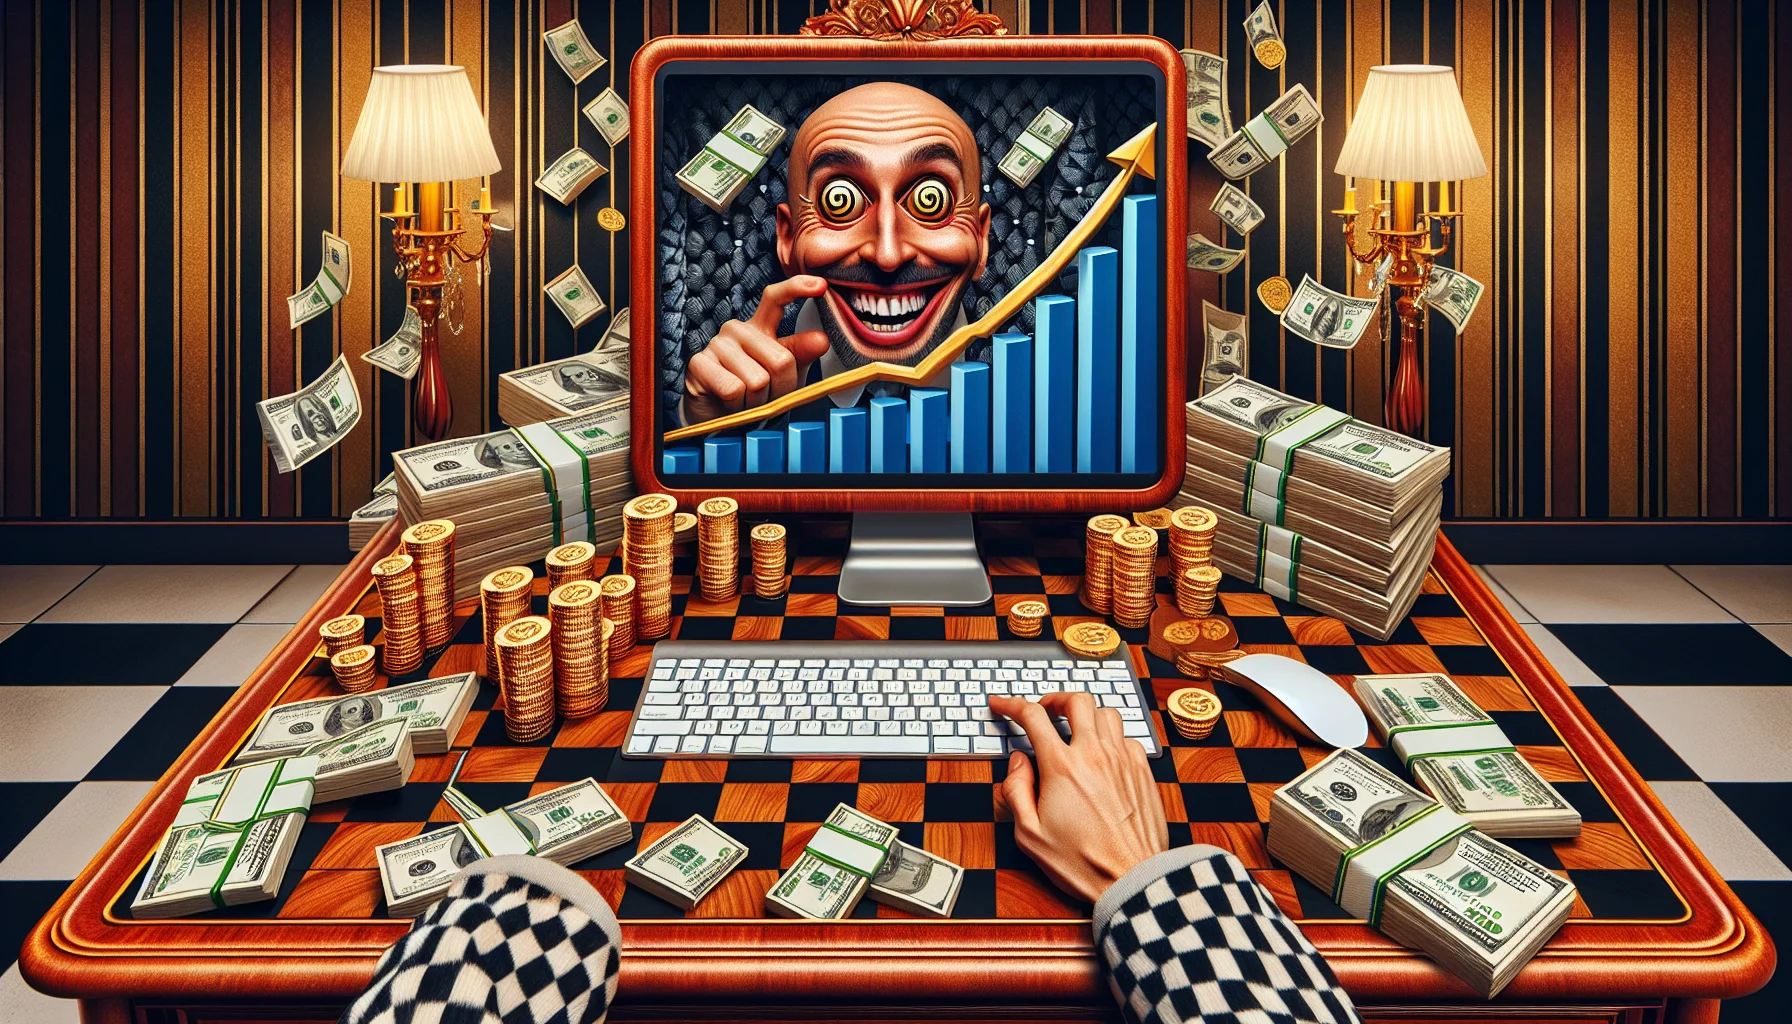 Create an image depicting a humorously exaggerated scenario related to online affiliate marketing. In this image, the main focus is a luxurious high-end designer patterns, like cane and checkerboard. To allude to making money online, you can show a computer screen displaying a graph with rising sales figures. The computer is on a high-end mahogany desk, surrounded by gold coins and stacks of dollar bills, suggesting immense profitability. For a comedic touch, include characters with wide grinning faces, eyes turned into dollar signs, and hands rubbing together in anticipation.